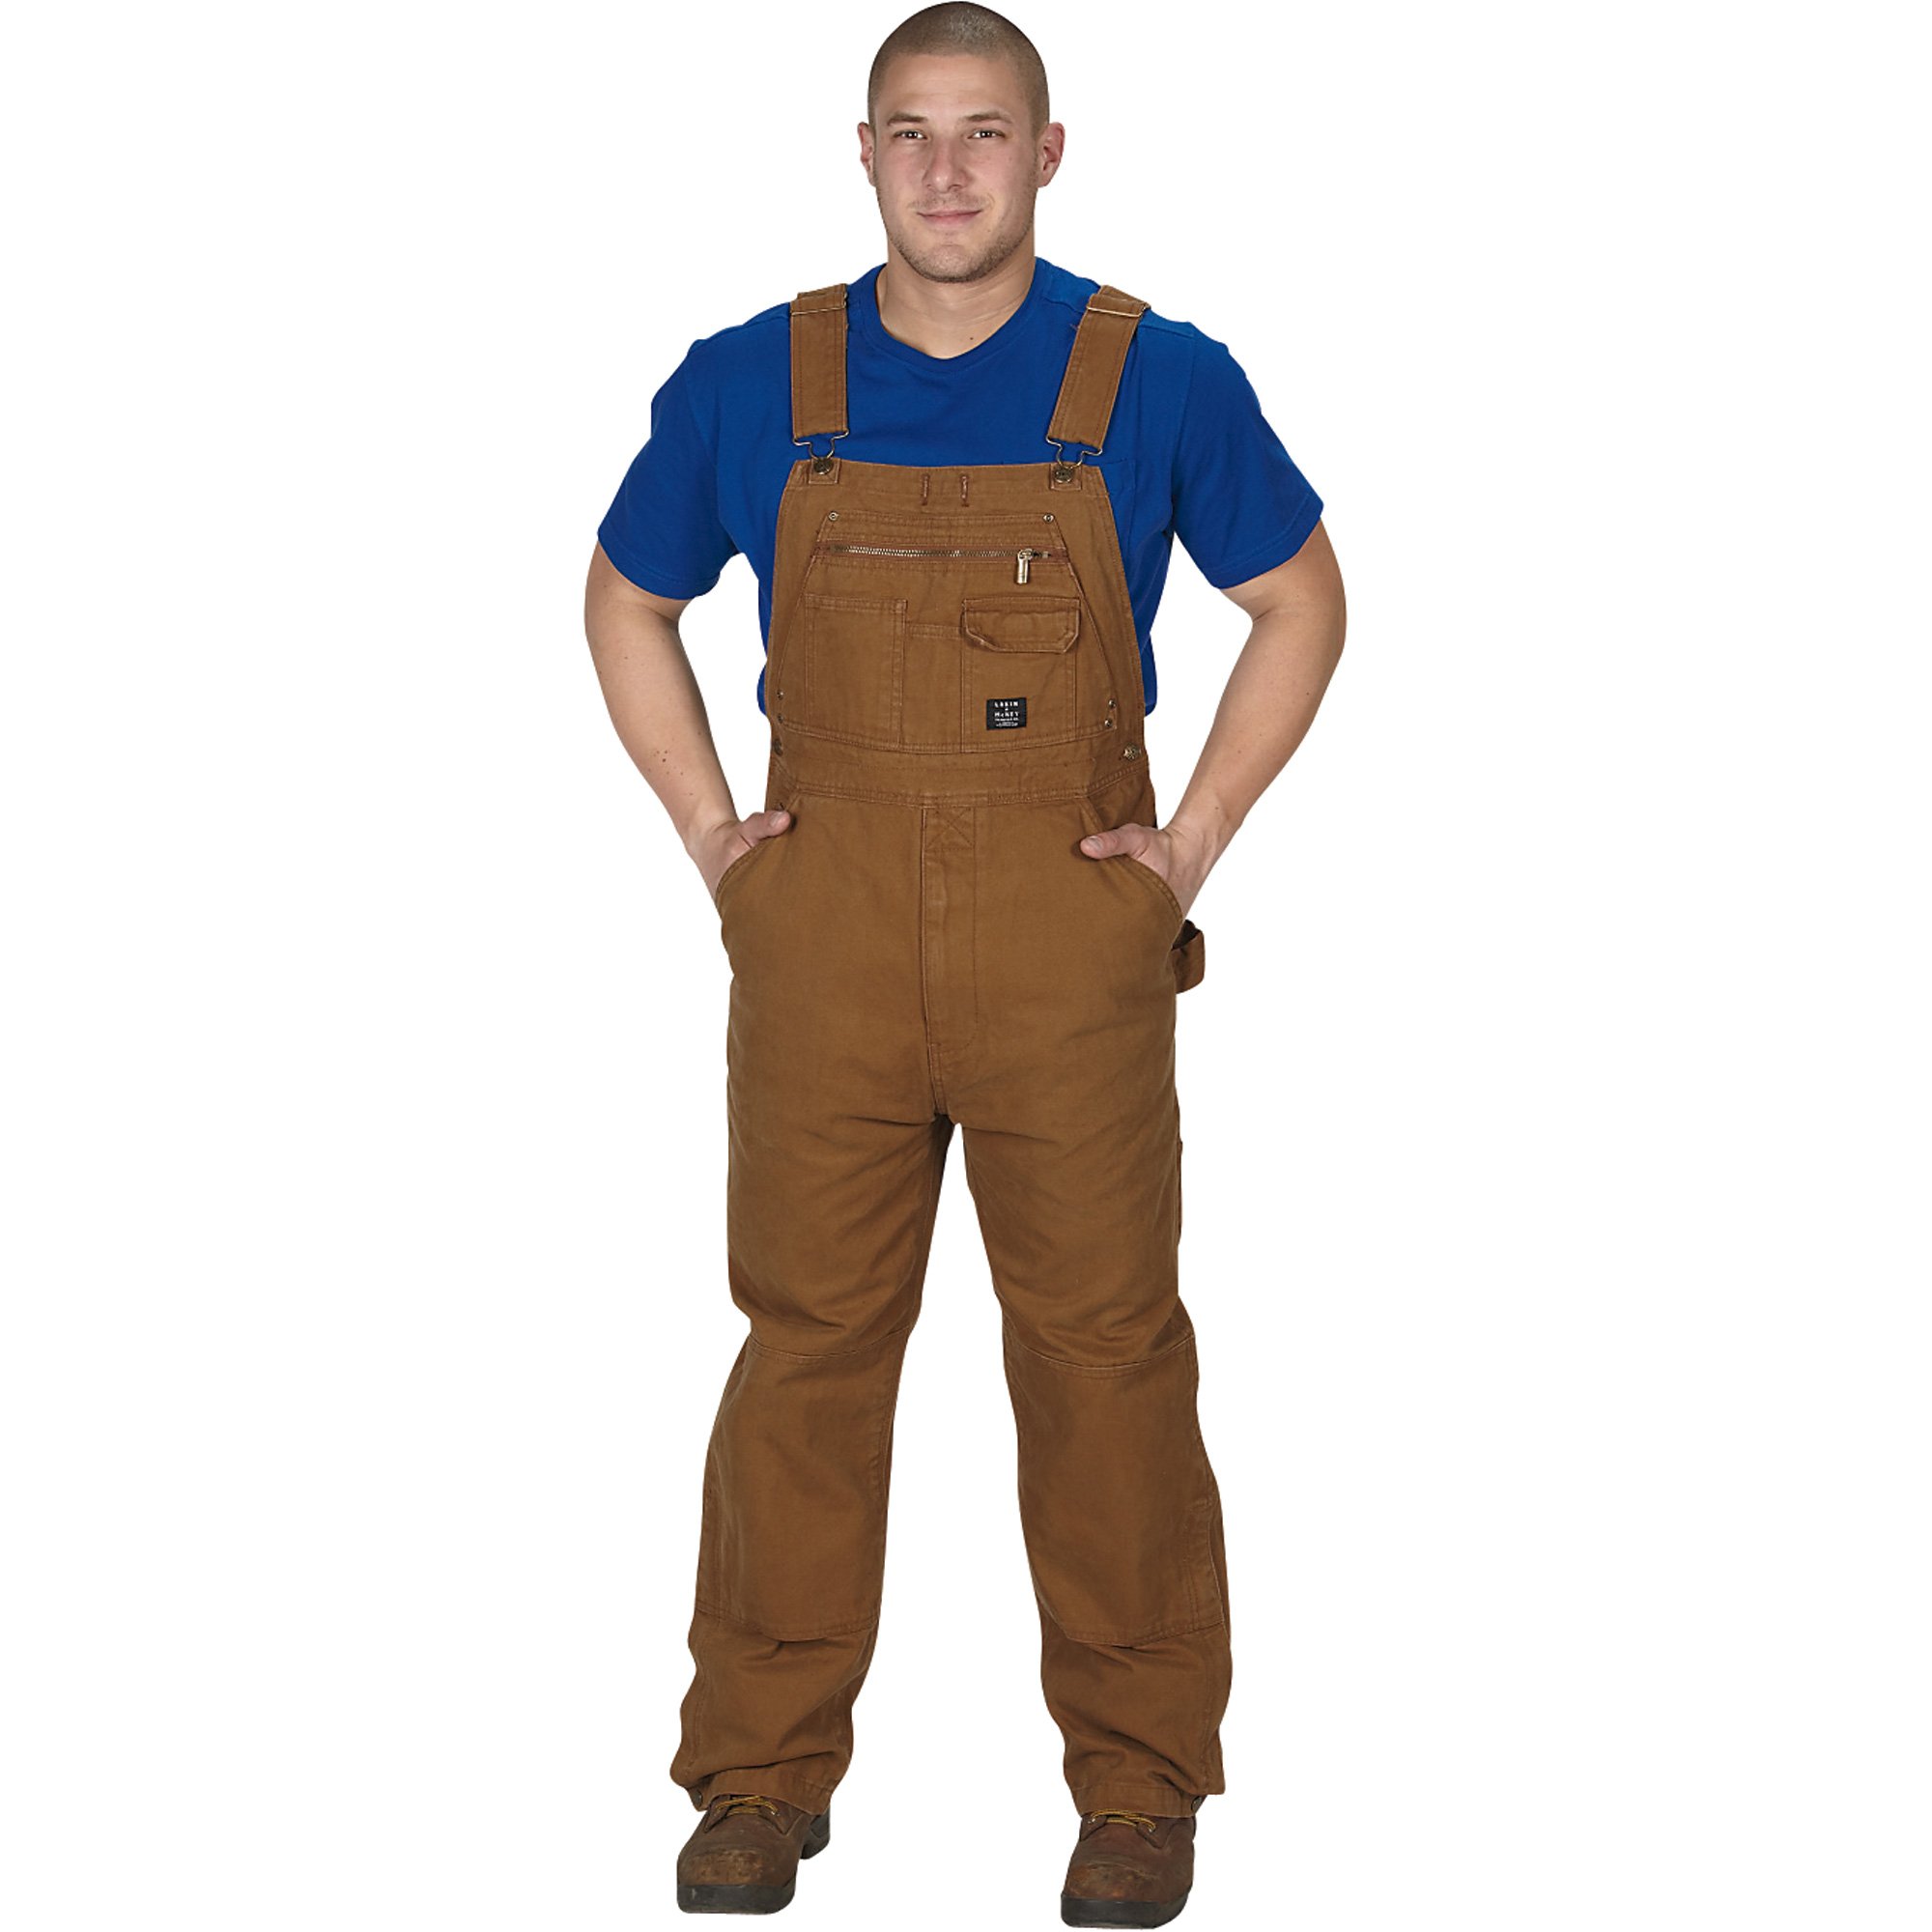 Key Men's Unlined Duck Bib Overall - Saddle, 36in. Waist x 36in